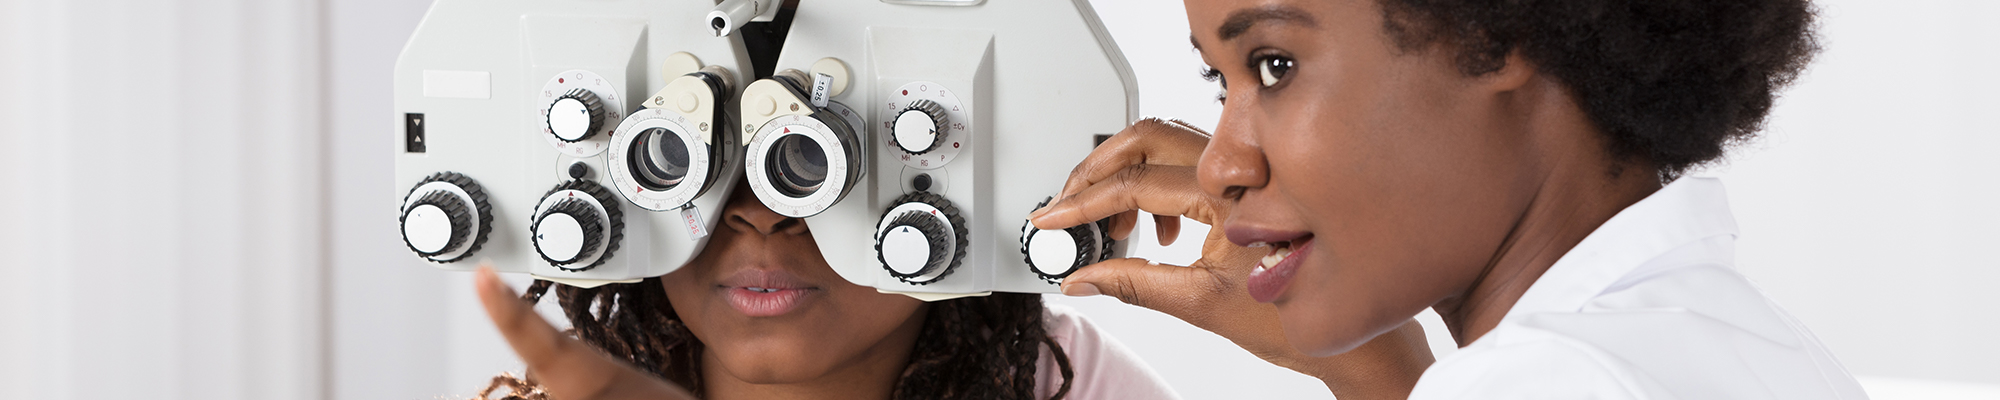 How Much Is An Eye Exam Without Insurance?